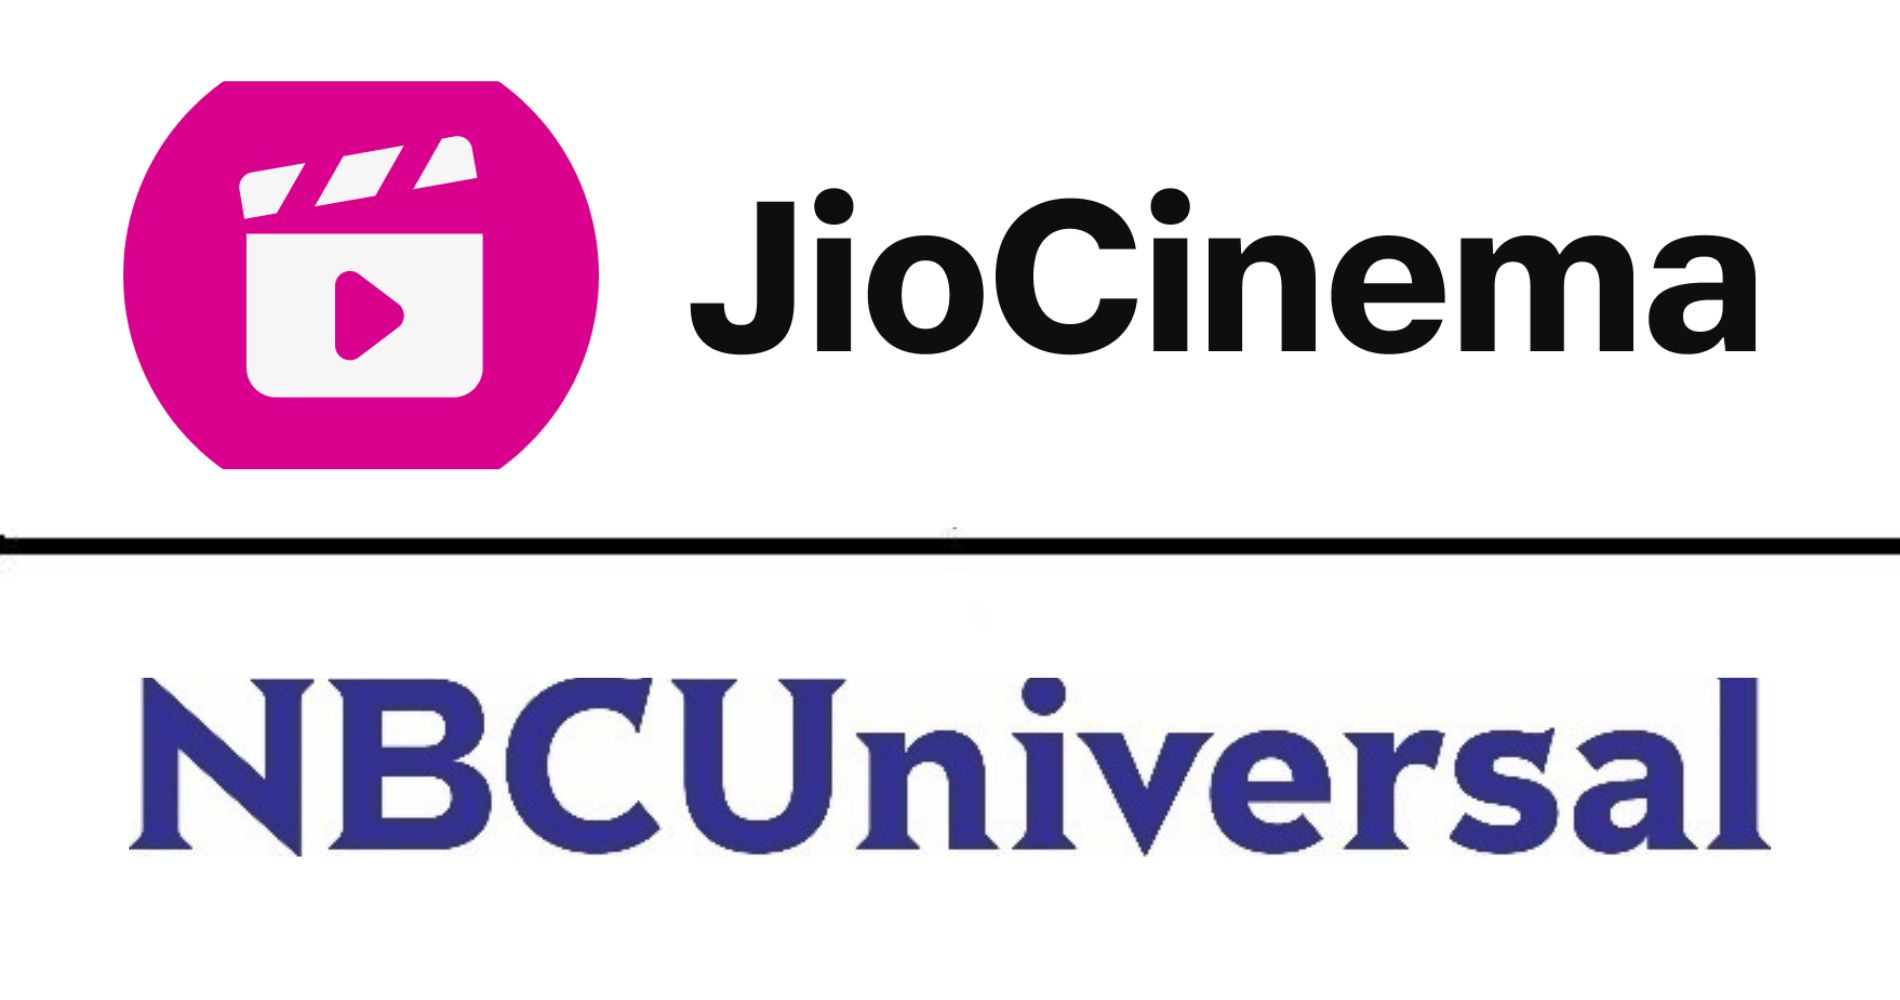 NBCUniversal And Viacom's JioCinema Enter Into An Extensive, Multi-Year Partnership